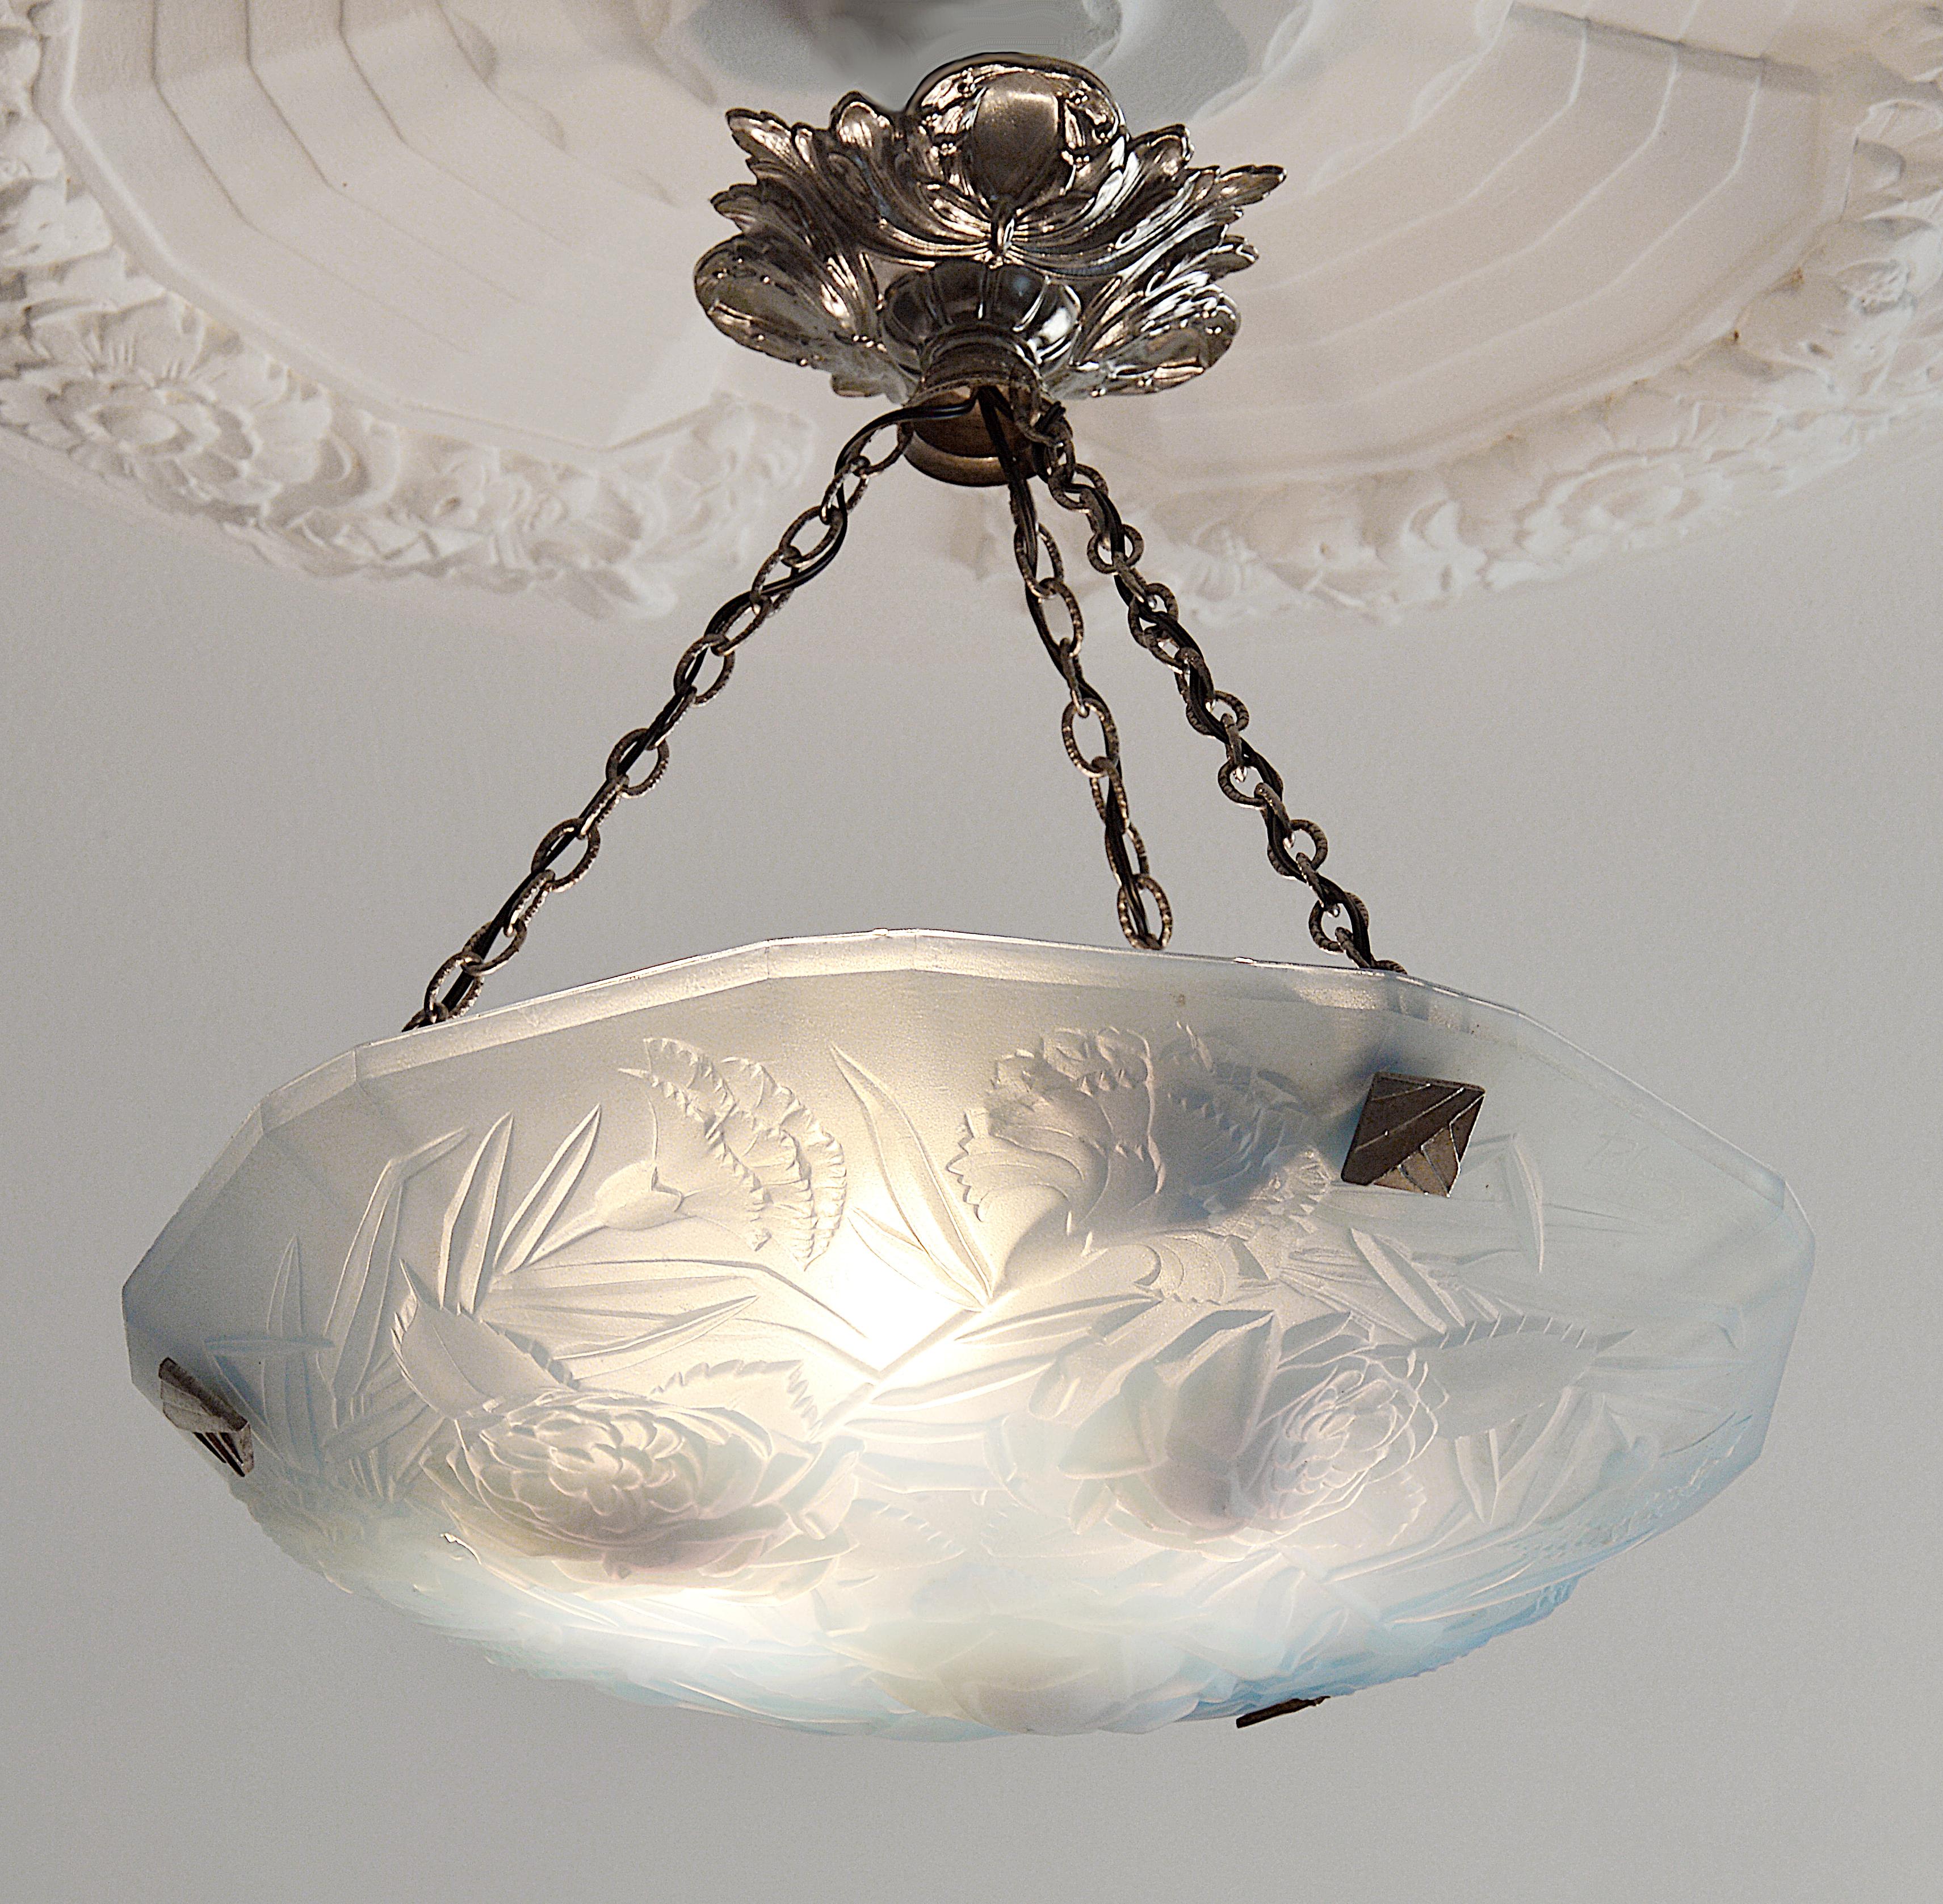 French Art Deco opalescent pendant chandelier by Roba (Paris), France, 1920s. Molded opalescent glass shade with its nickel-plated brass fixture. Measures: Height 13.4